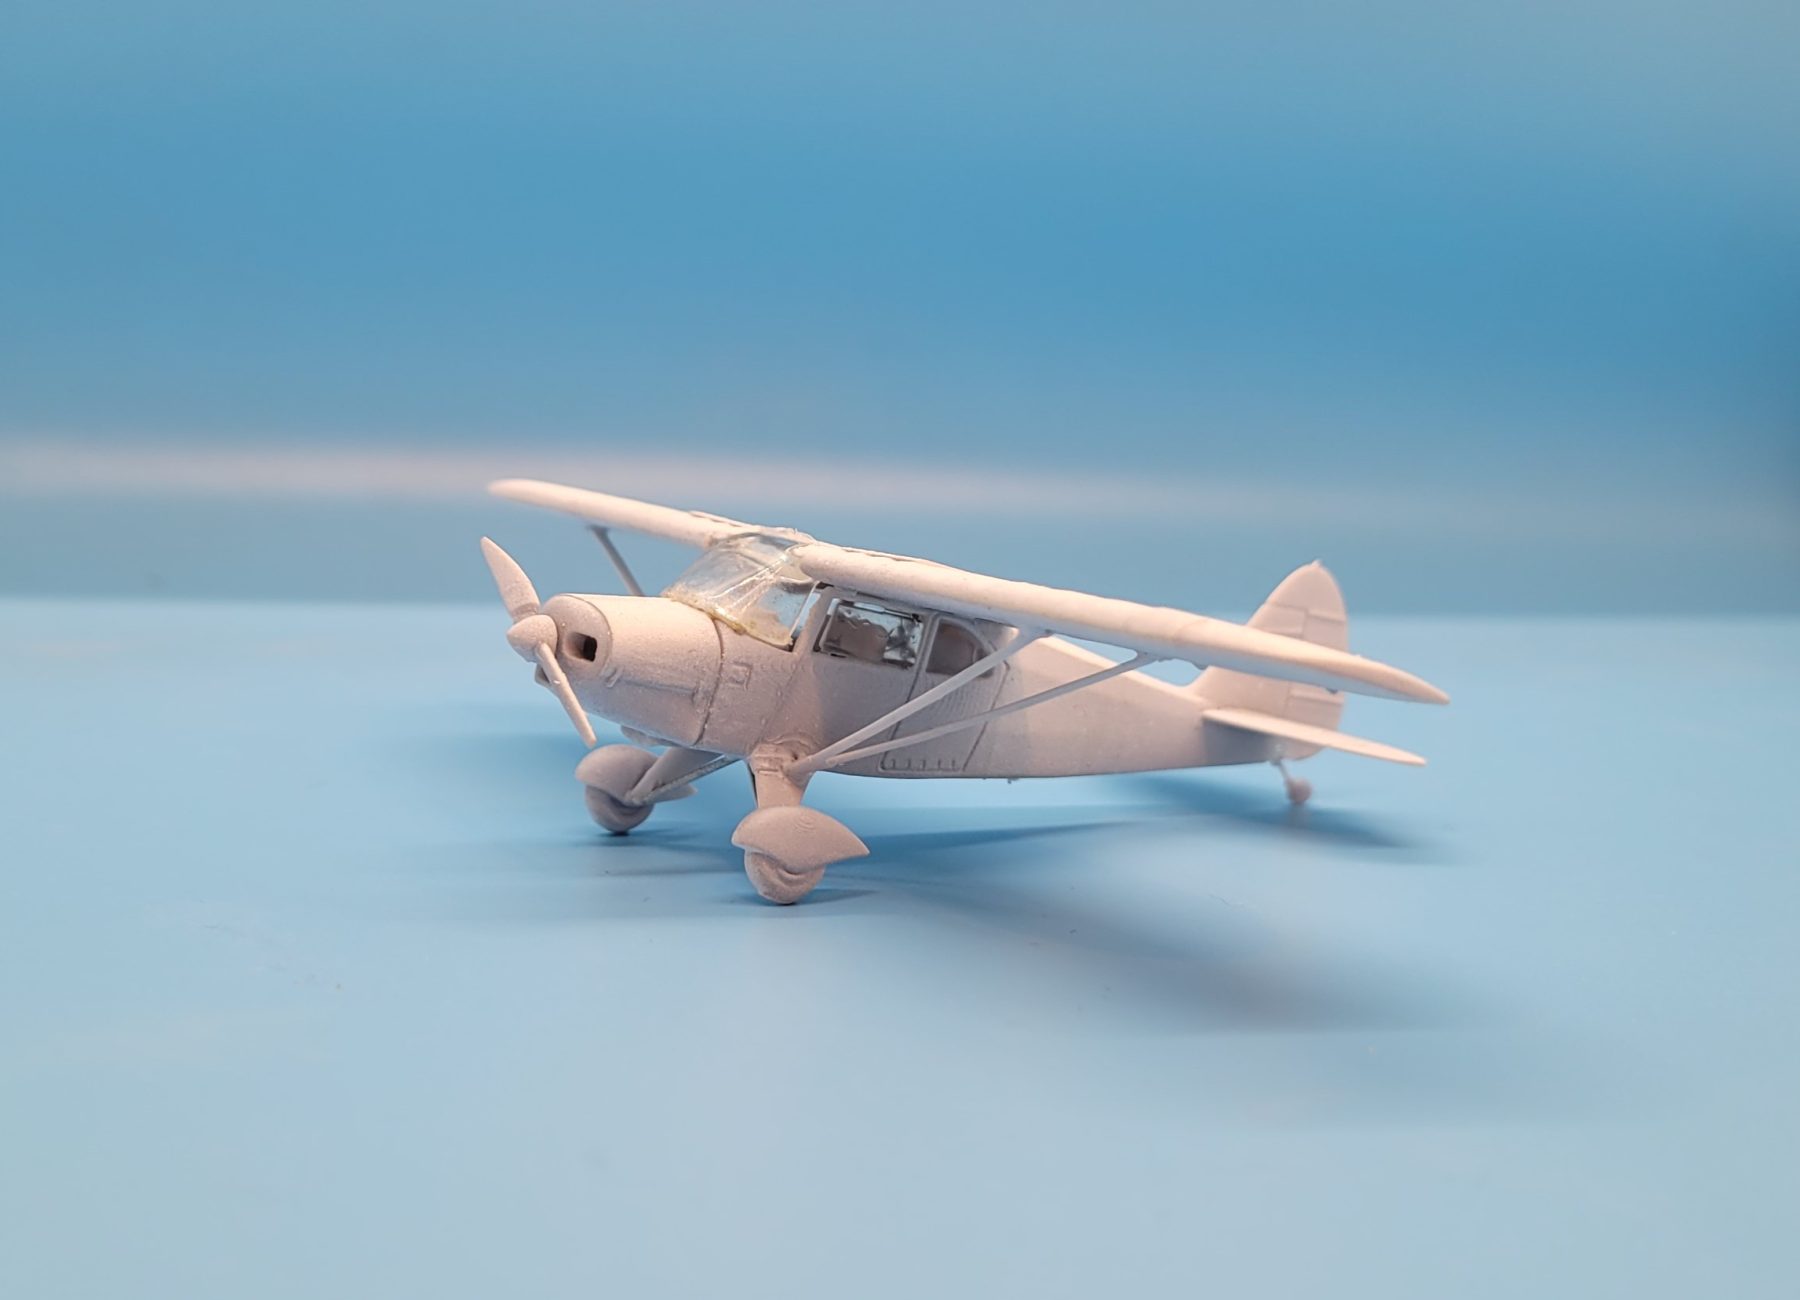 1:72 Piper PA-20 Pacer